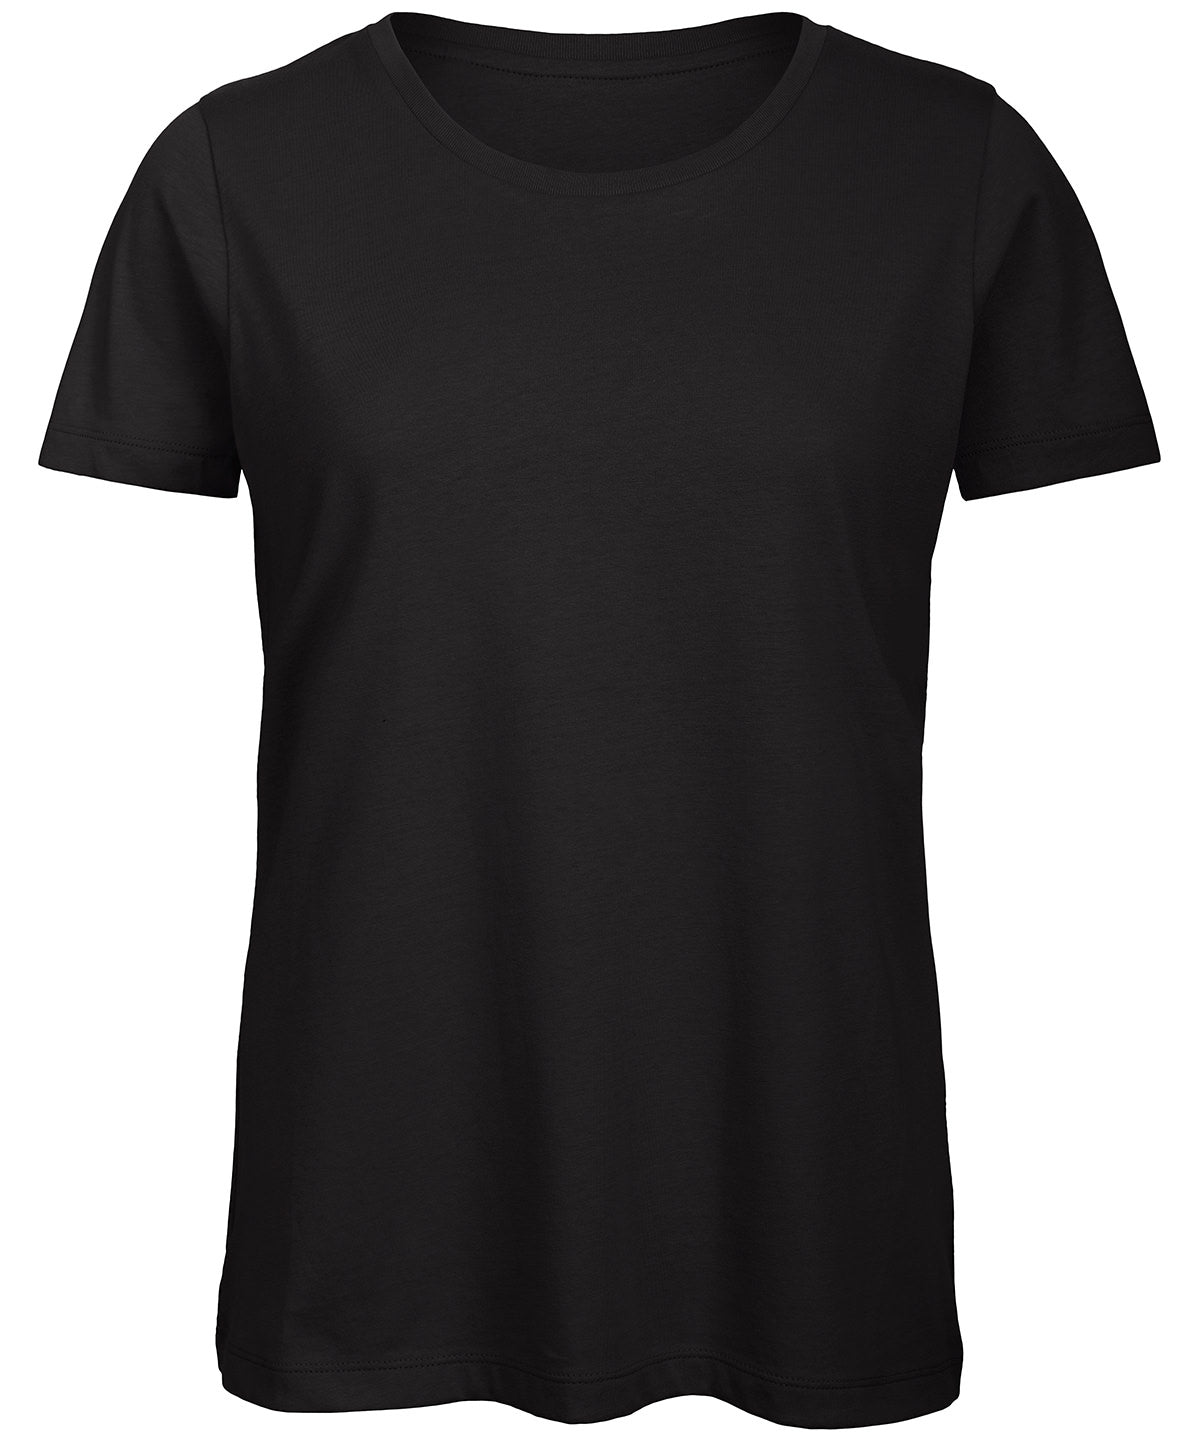 Personalised T-Shirts - Black B&C Collection B&C Inspire T /women